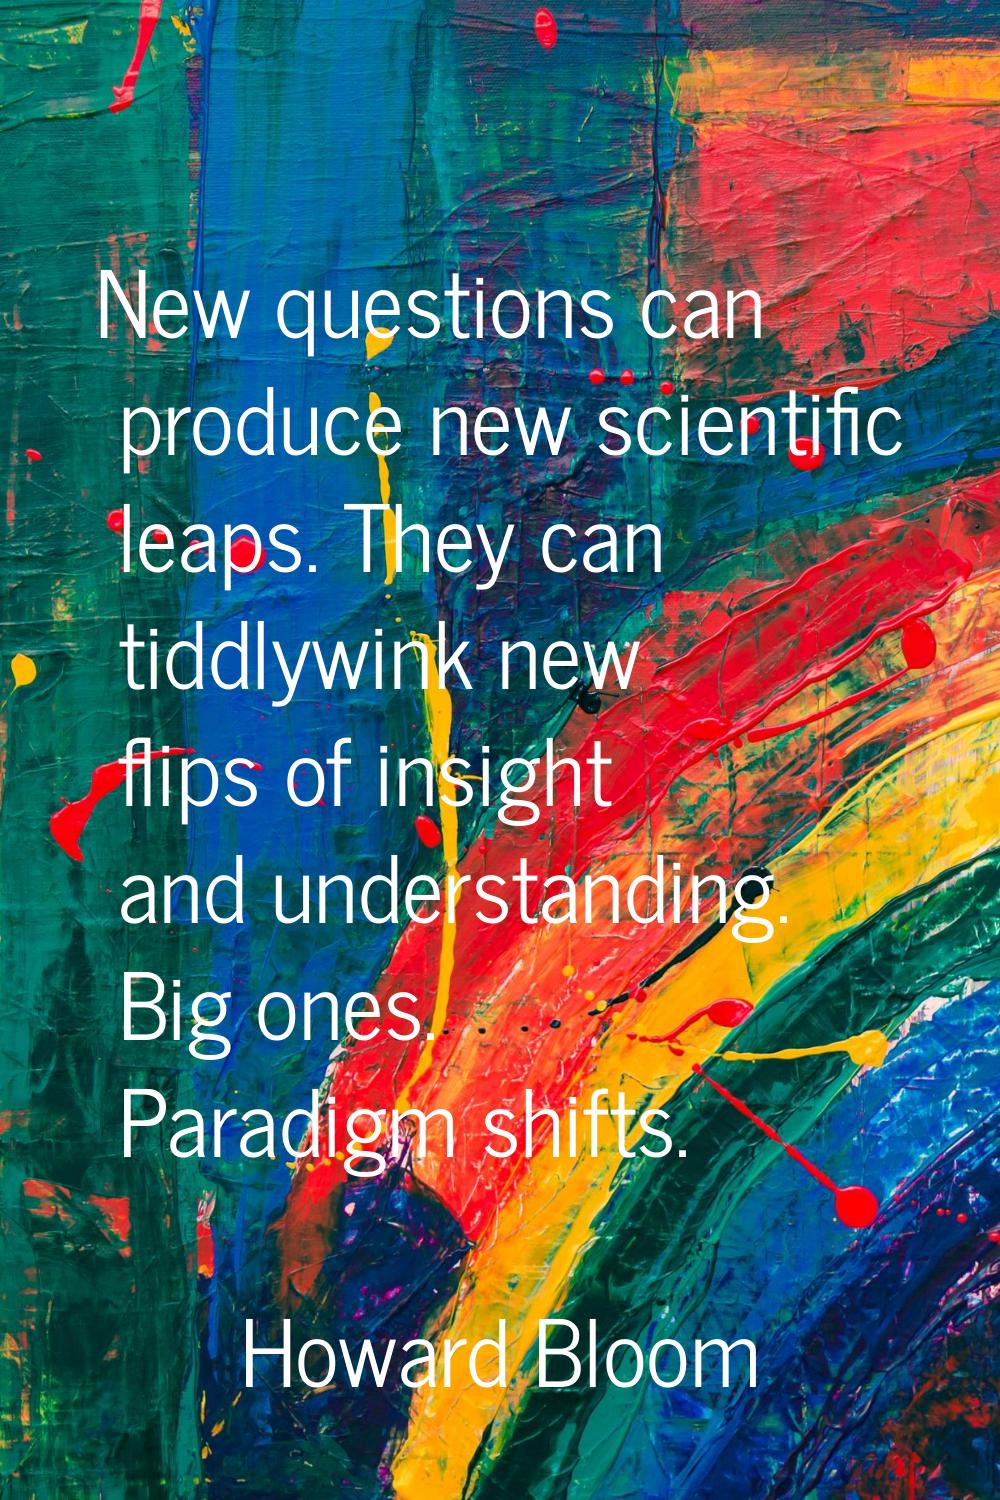 New questions can produce new scientific leaps. They can tiddlywink new flips of insight and unders